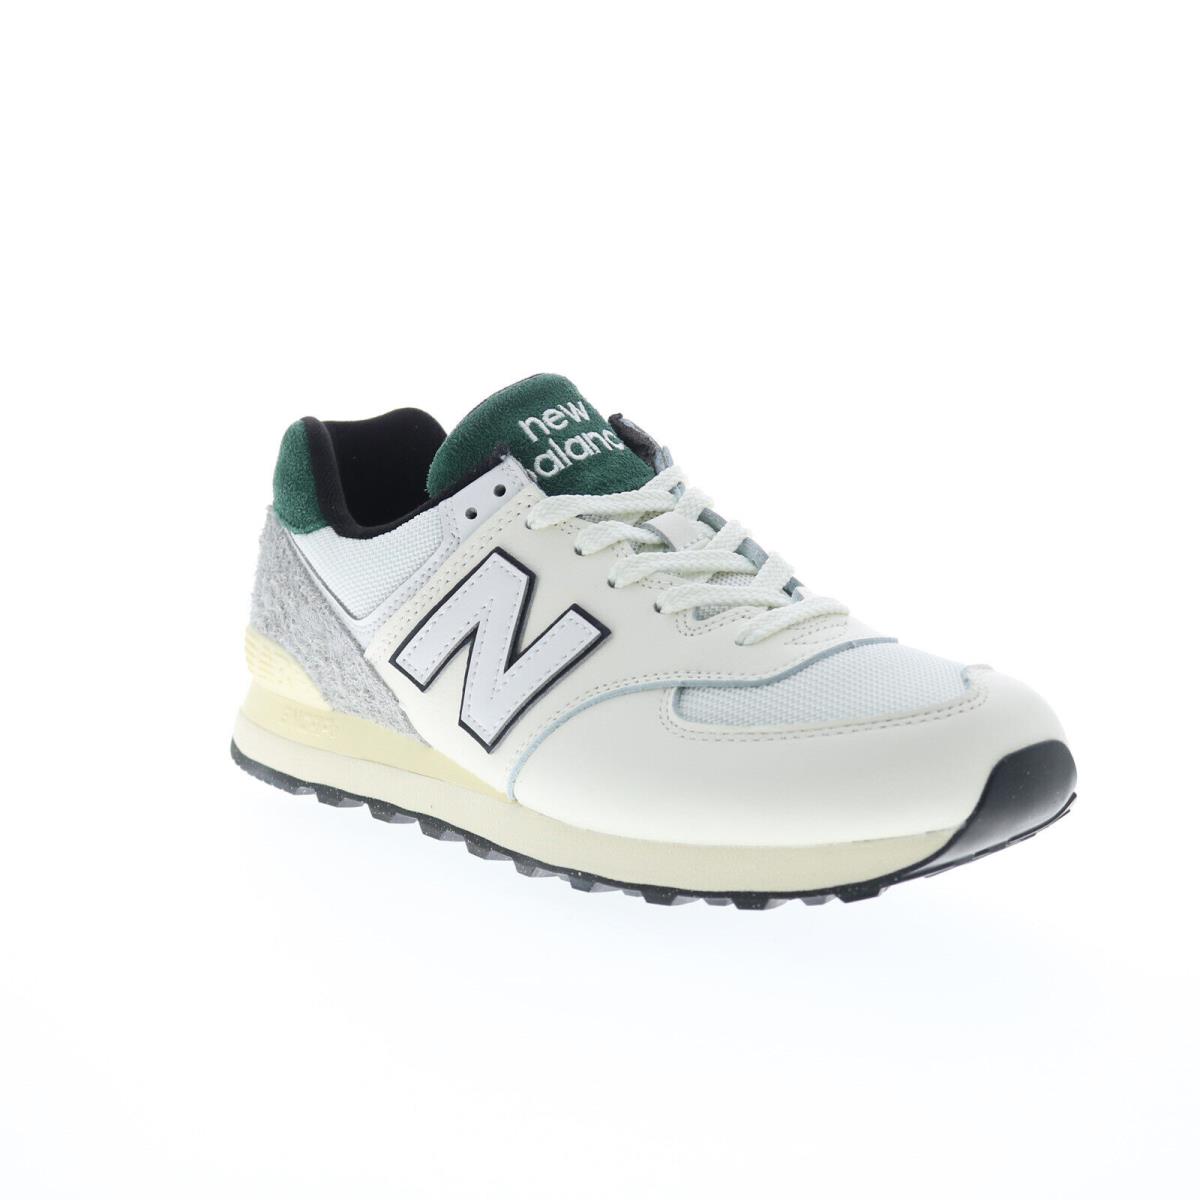 New Balance 574 U574VX2 Mens White Leather Lace Up Lifestyle Sneakers Shoes - White